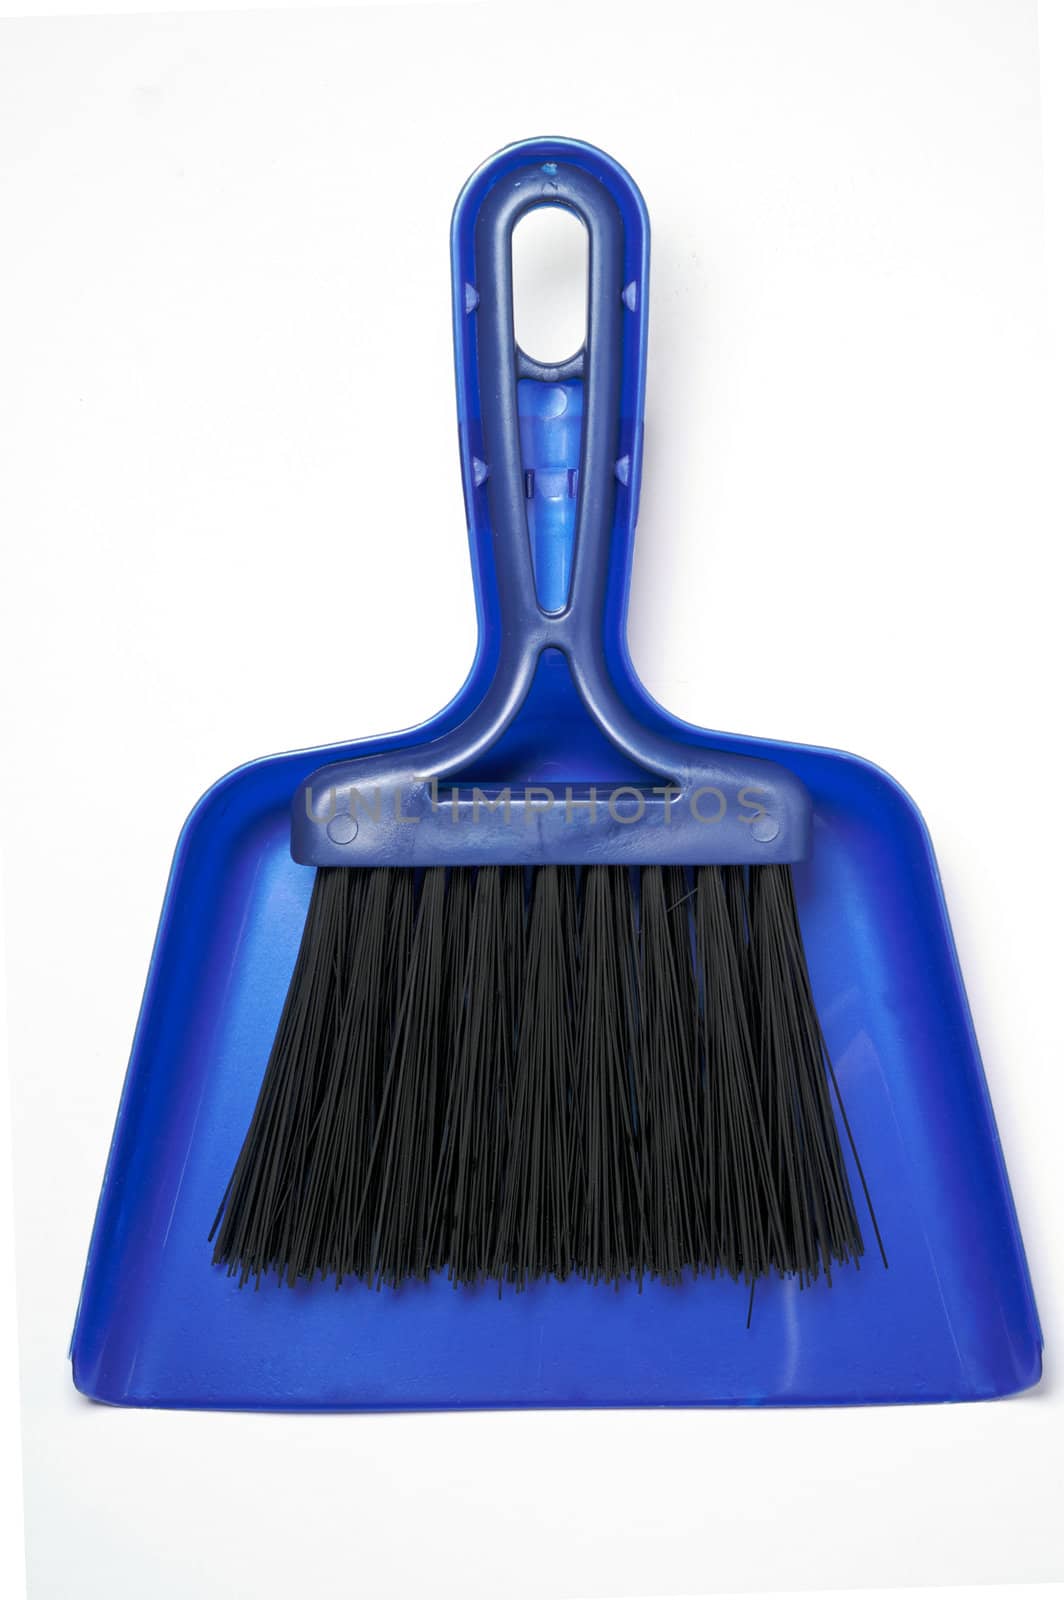 Dustpan and brush with clipping path by Laborer